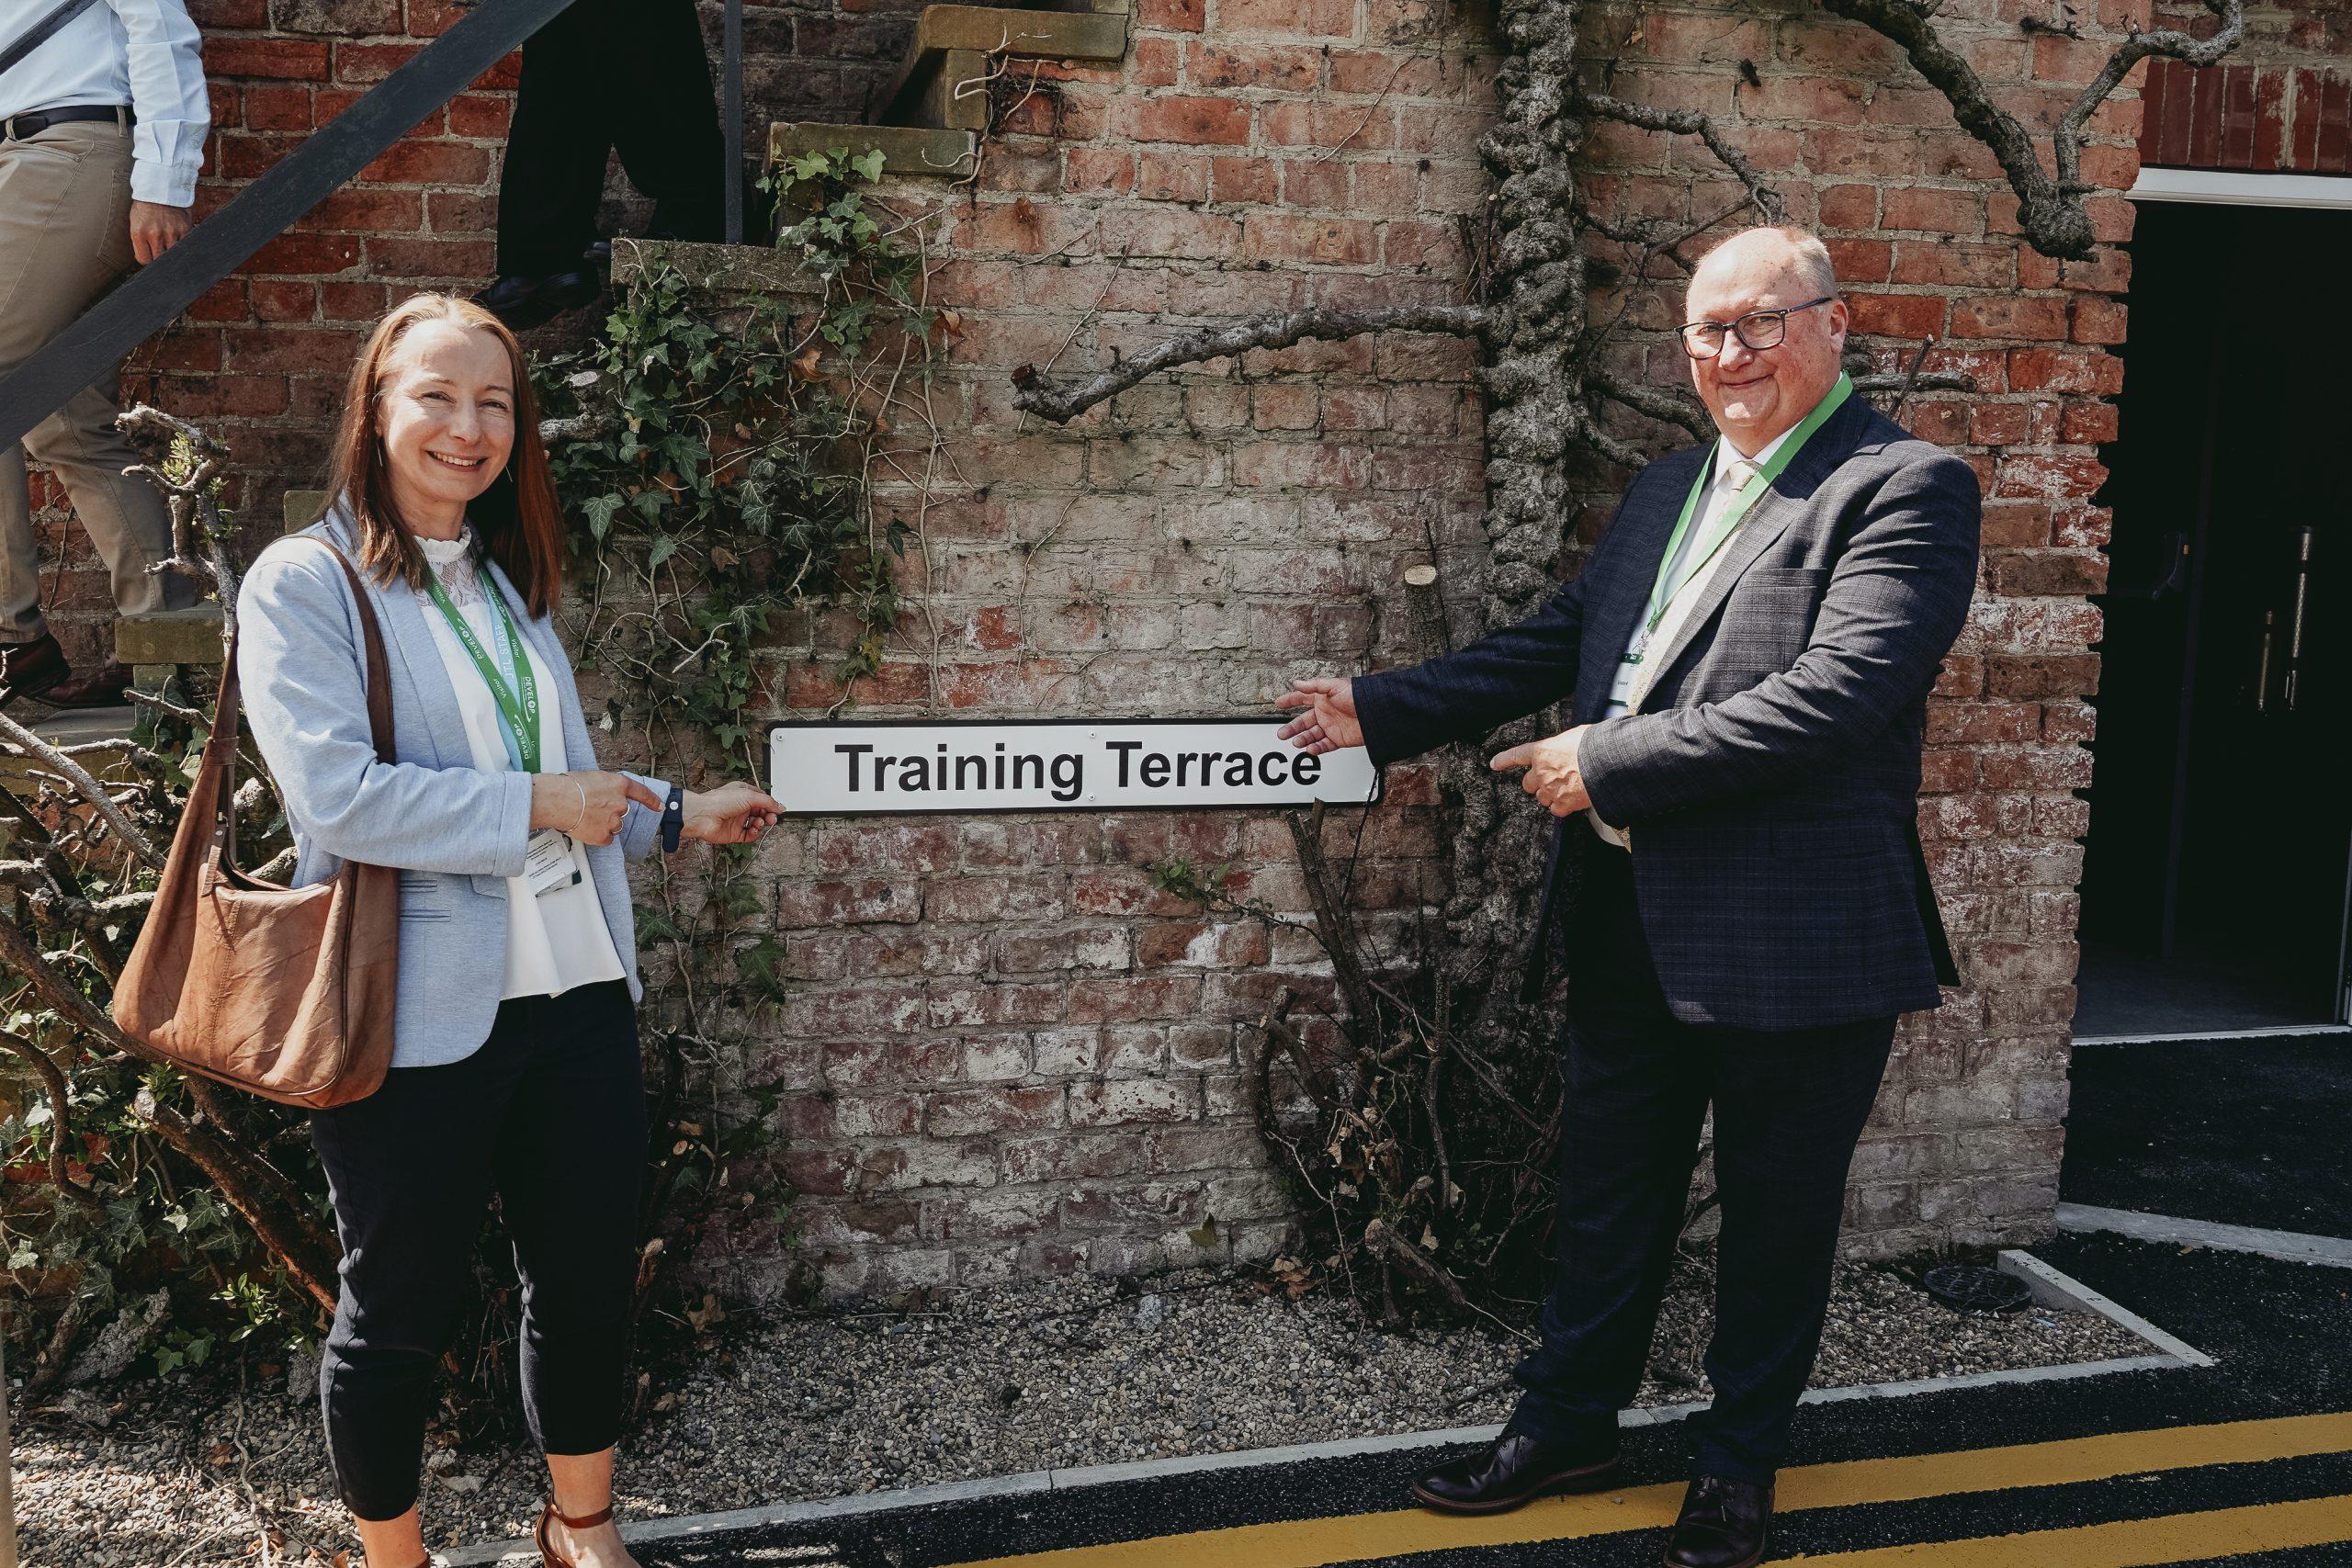 Lindsay Talks Takes the Spotlight at Grand Unveiling of Training Terrace - Develop Training